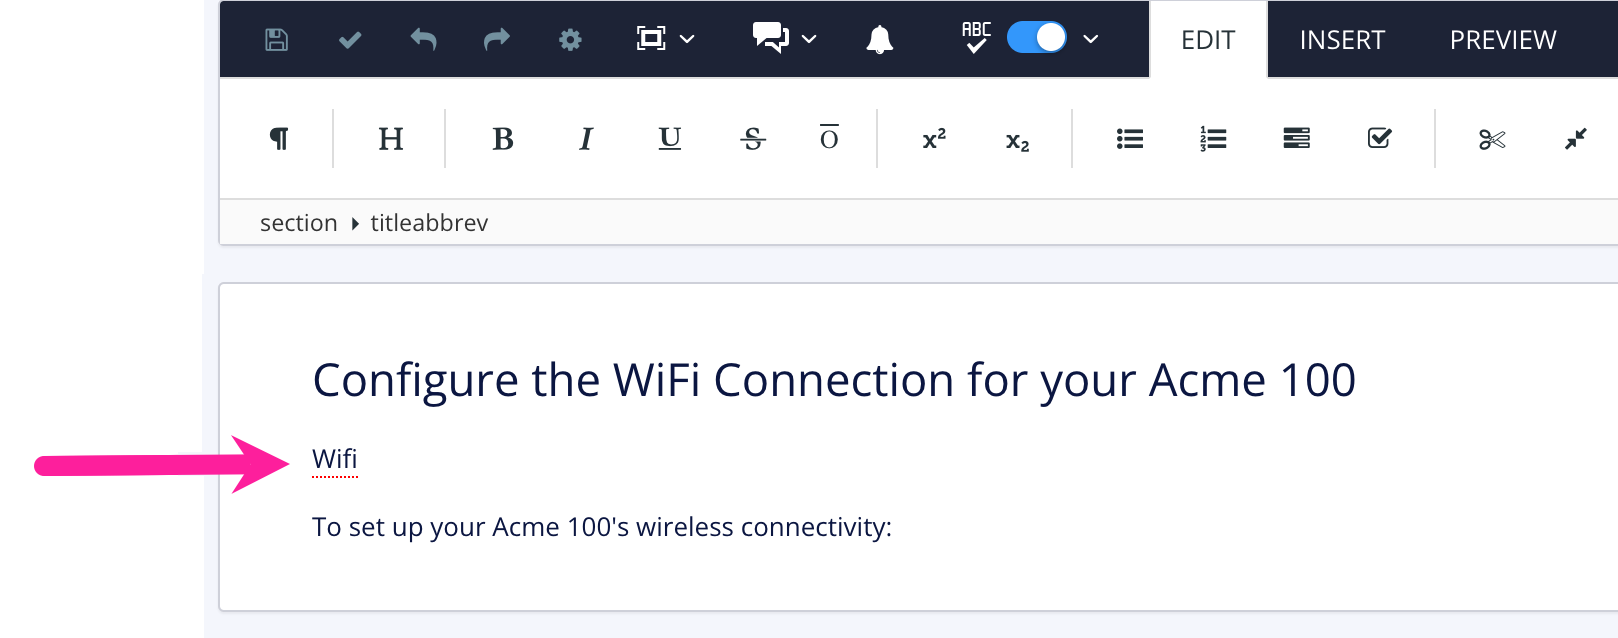 Topic showing a title with a titleabbrev element below it. The title is "Configure the WiFi Connections for your ACME 100". The titleabbrev is "WiFi".